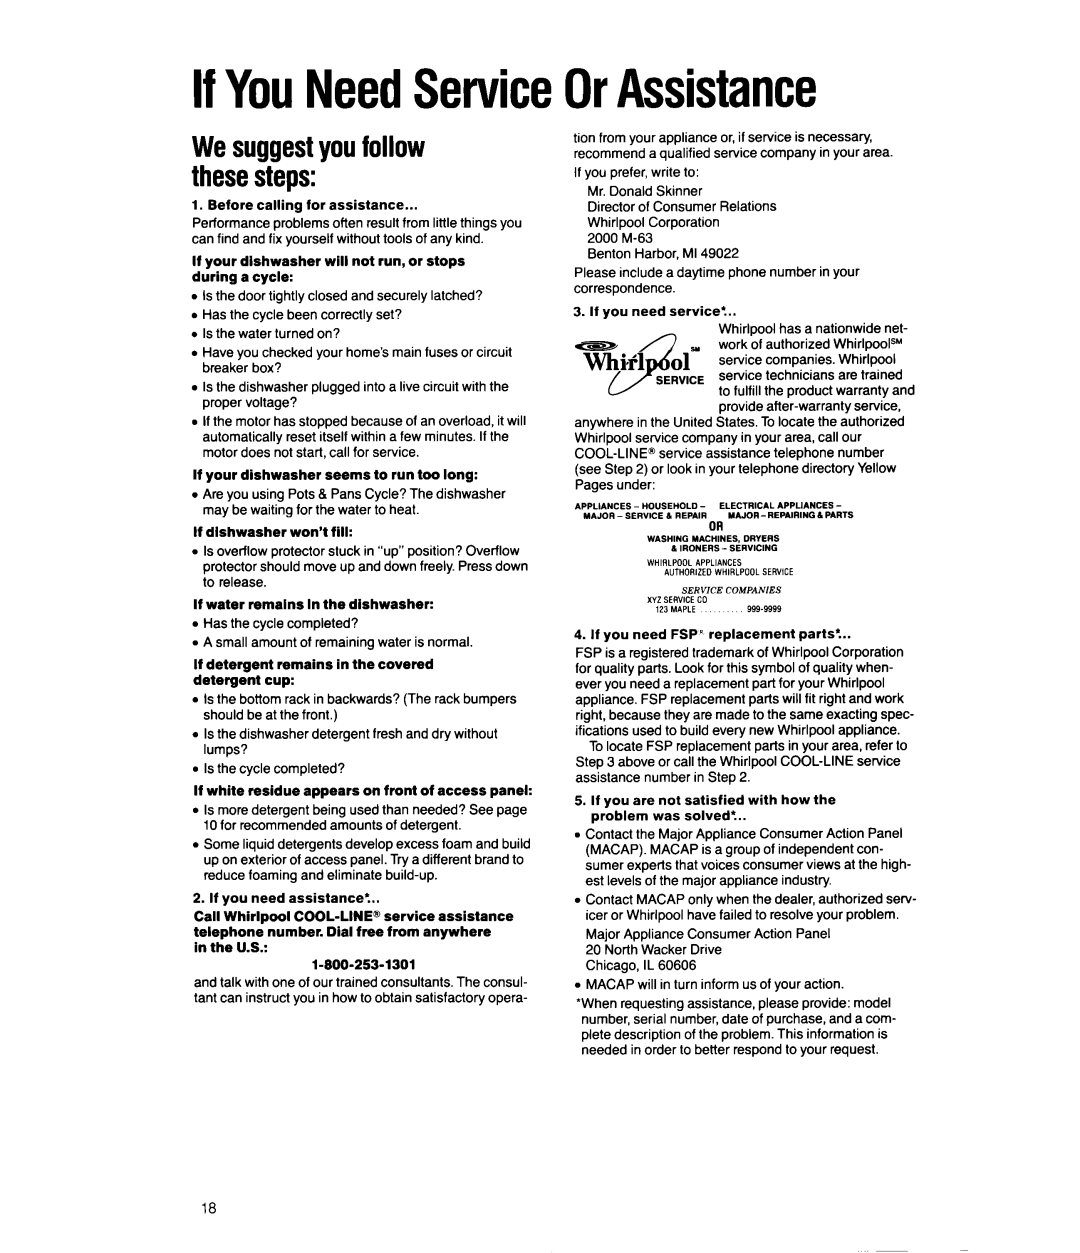 Whirlpool DP8350XV manual IfYouNeedServiceOrAssistance, Wesuggestyou follow thesesteps 